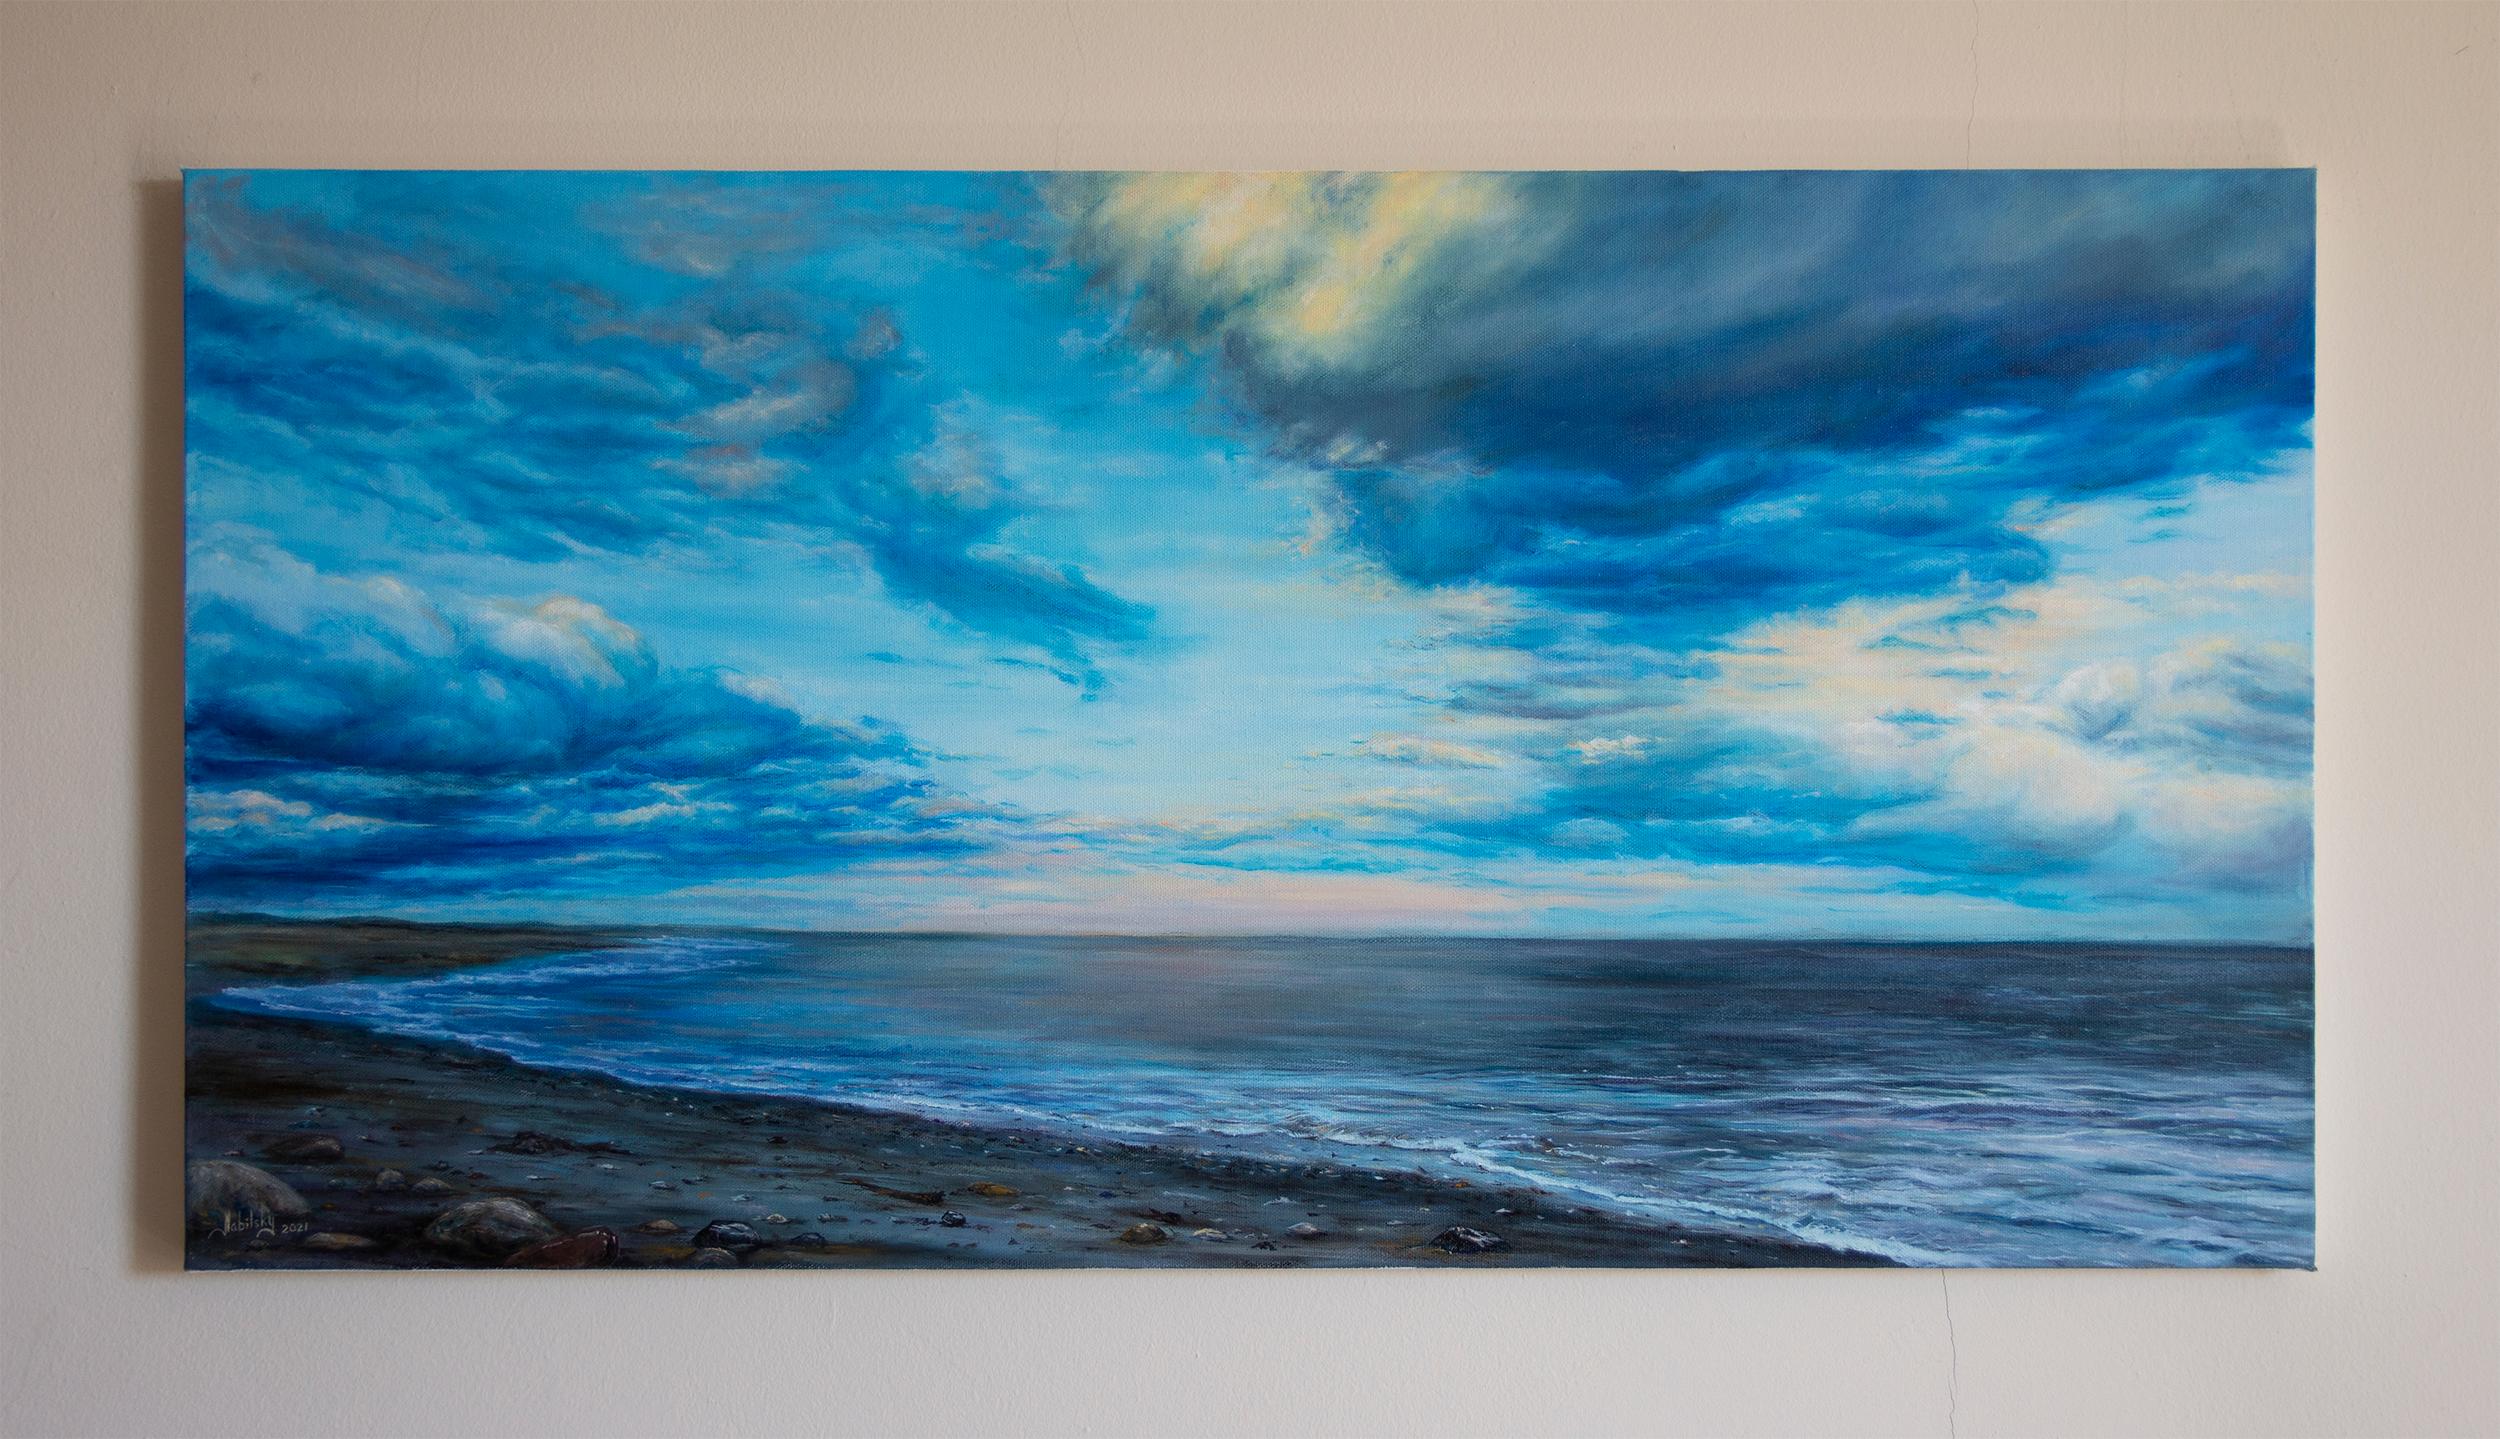 <p>Artist Comments<br>Inspired by a walk along the beaches of Long Island, artist Olena Nabilsky presents an idyllic scene where the ocean meets the sky. The air and water dance together, creating a harmonious union of vibrant blue stretching